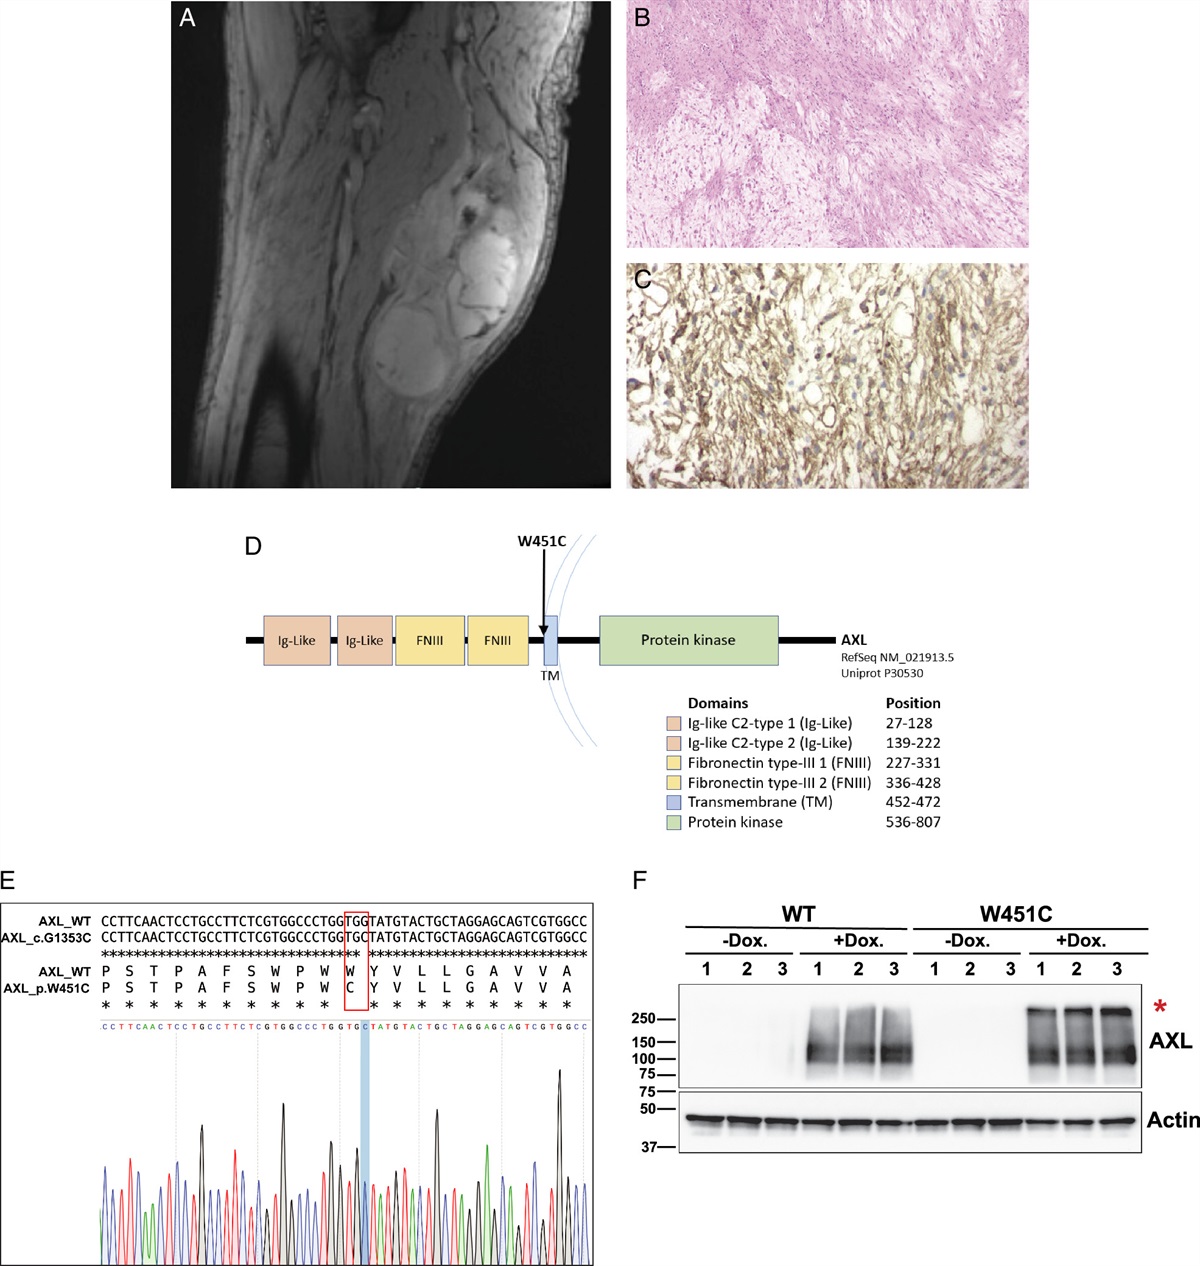 Pan-cancer Genomic Analysis of AXL Mutations Reveals a Novel, Recurrent, Functionally Activating AXL W451C Alteration Specific to Myxofibrosarcoma